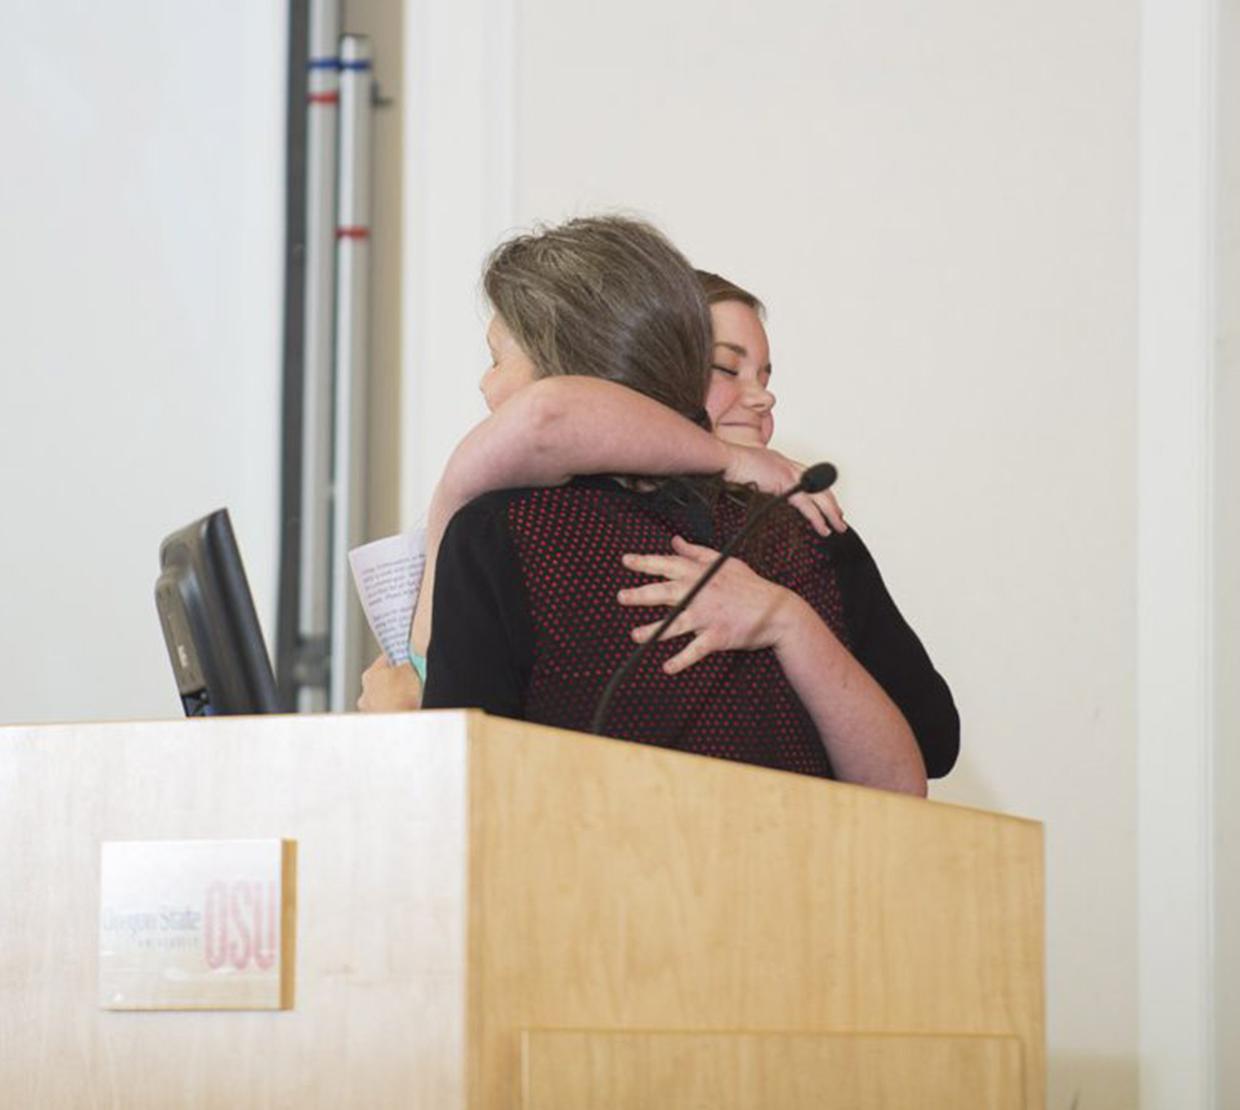 Two women hugging each other behind podium